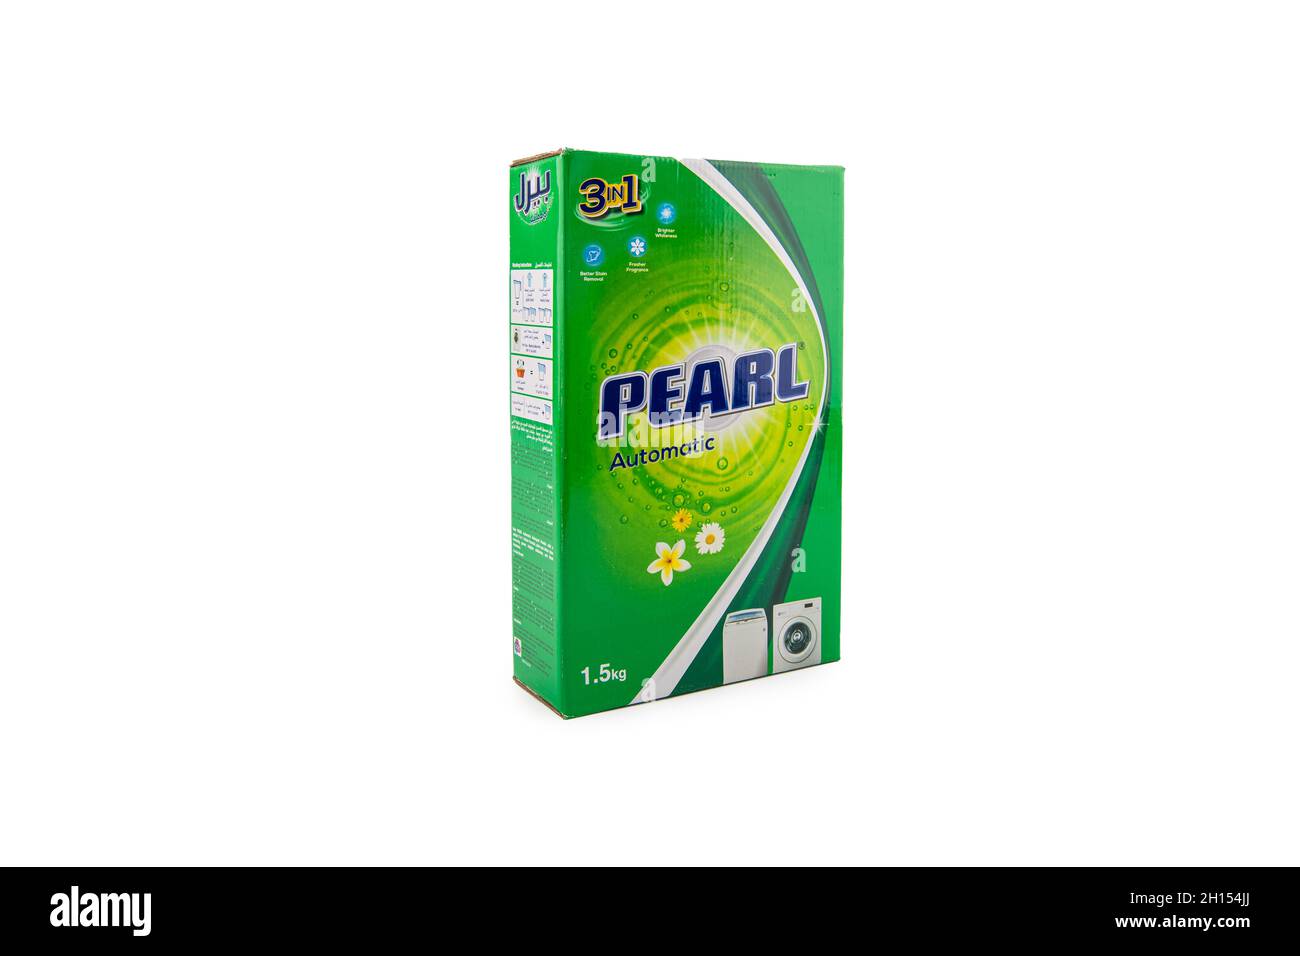 Pearl high foam Detergent powder on isolated background. Stock Photo